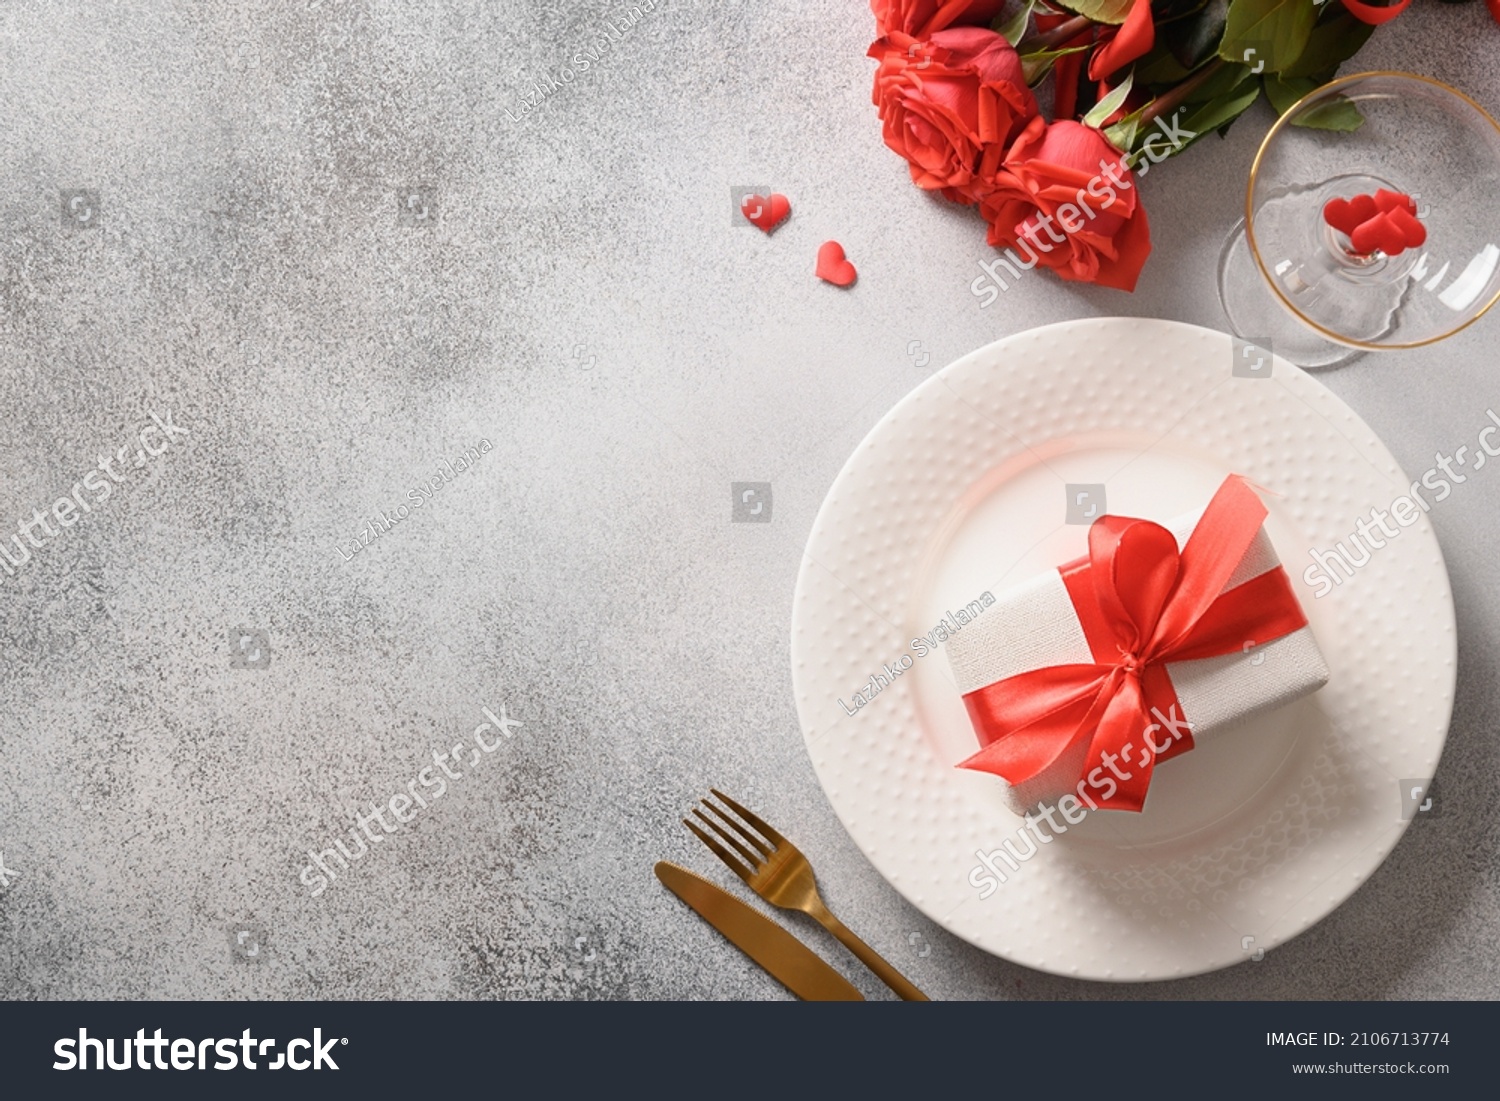 Valentine's day dinner with red roses, romantic gift and red roses on gray background. View from above. Copy space. #2106713774